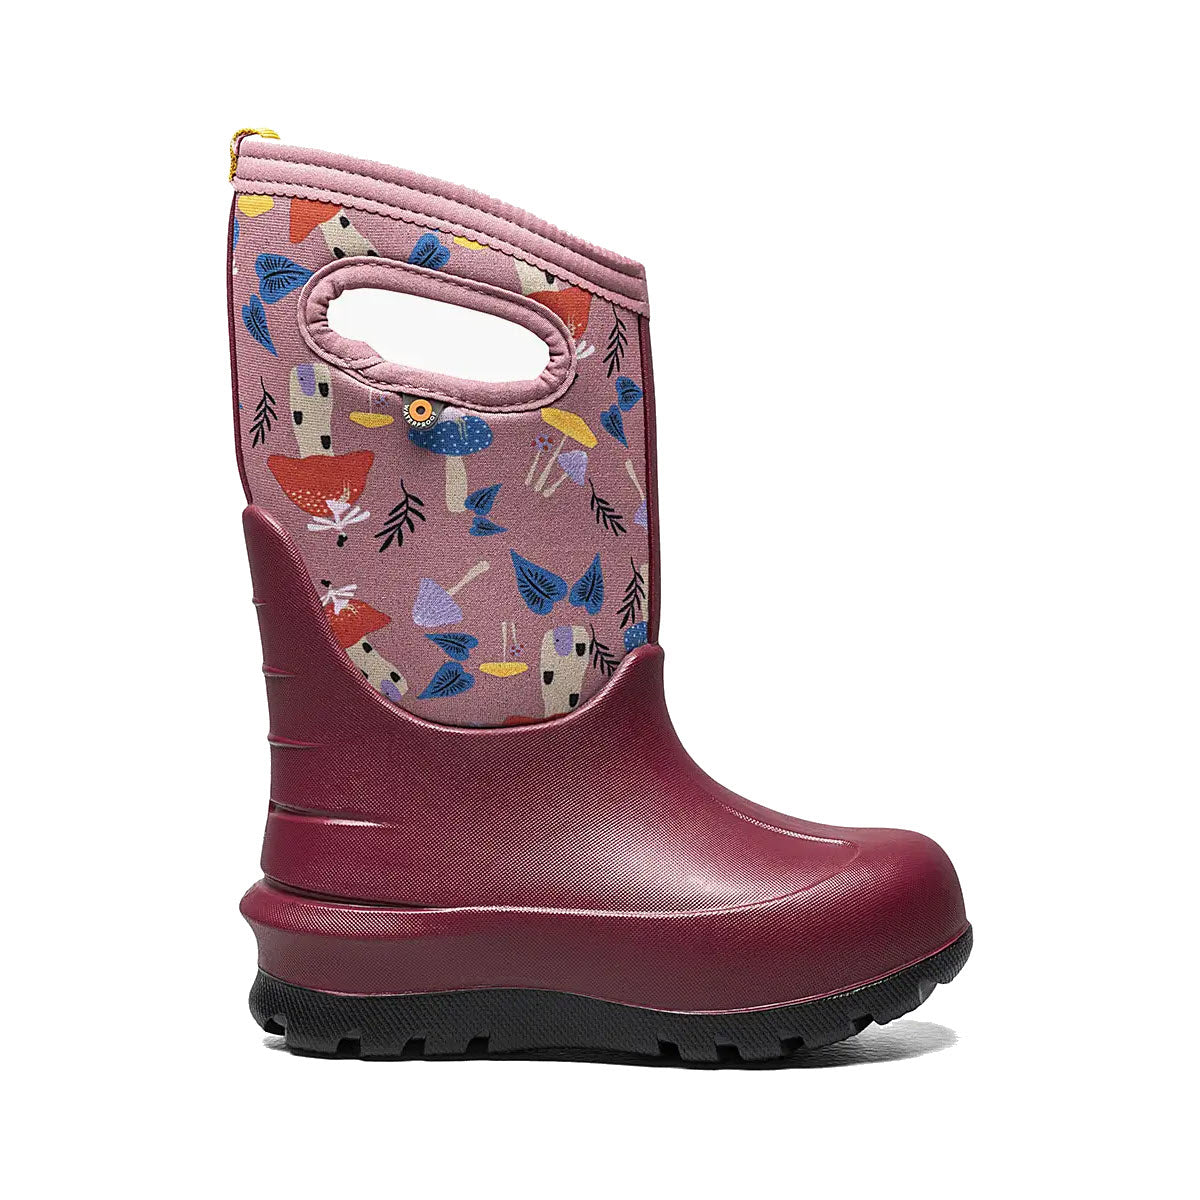 Child&#39;s rain boot with animal print design, handle, and BOGS Neo-Tech insulation for waterproof warmth.